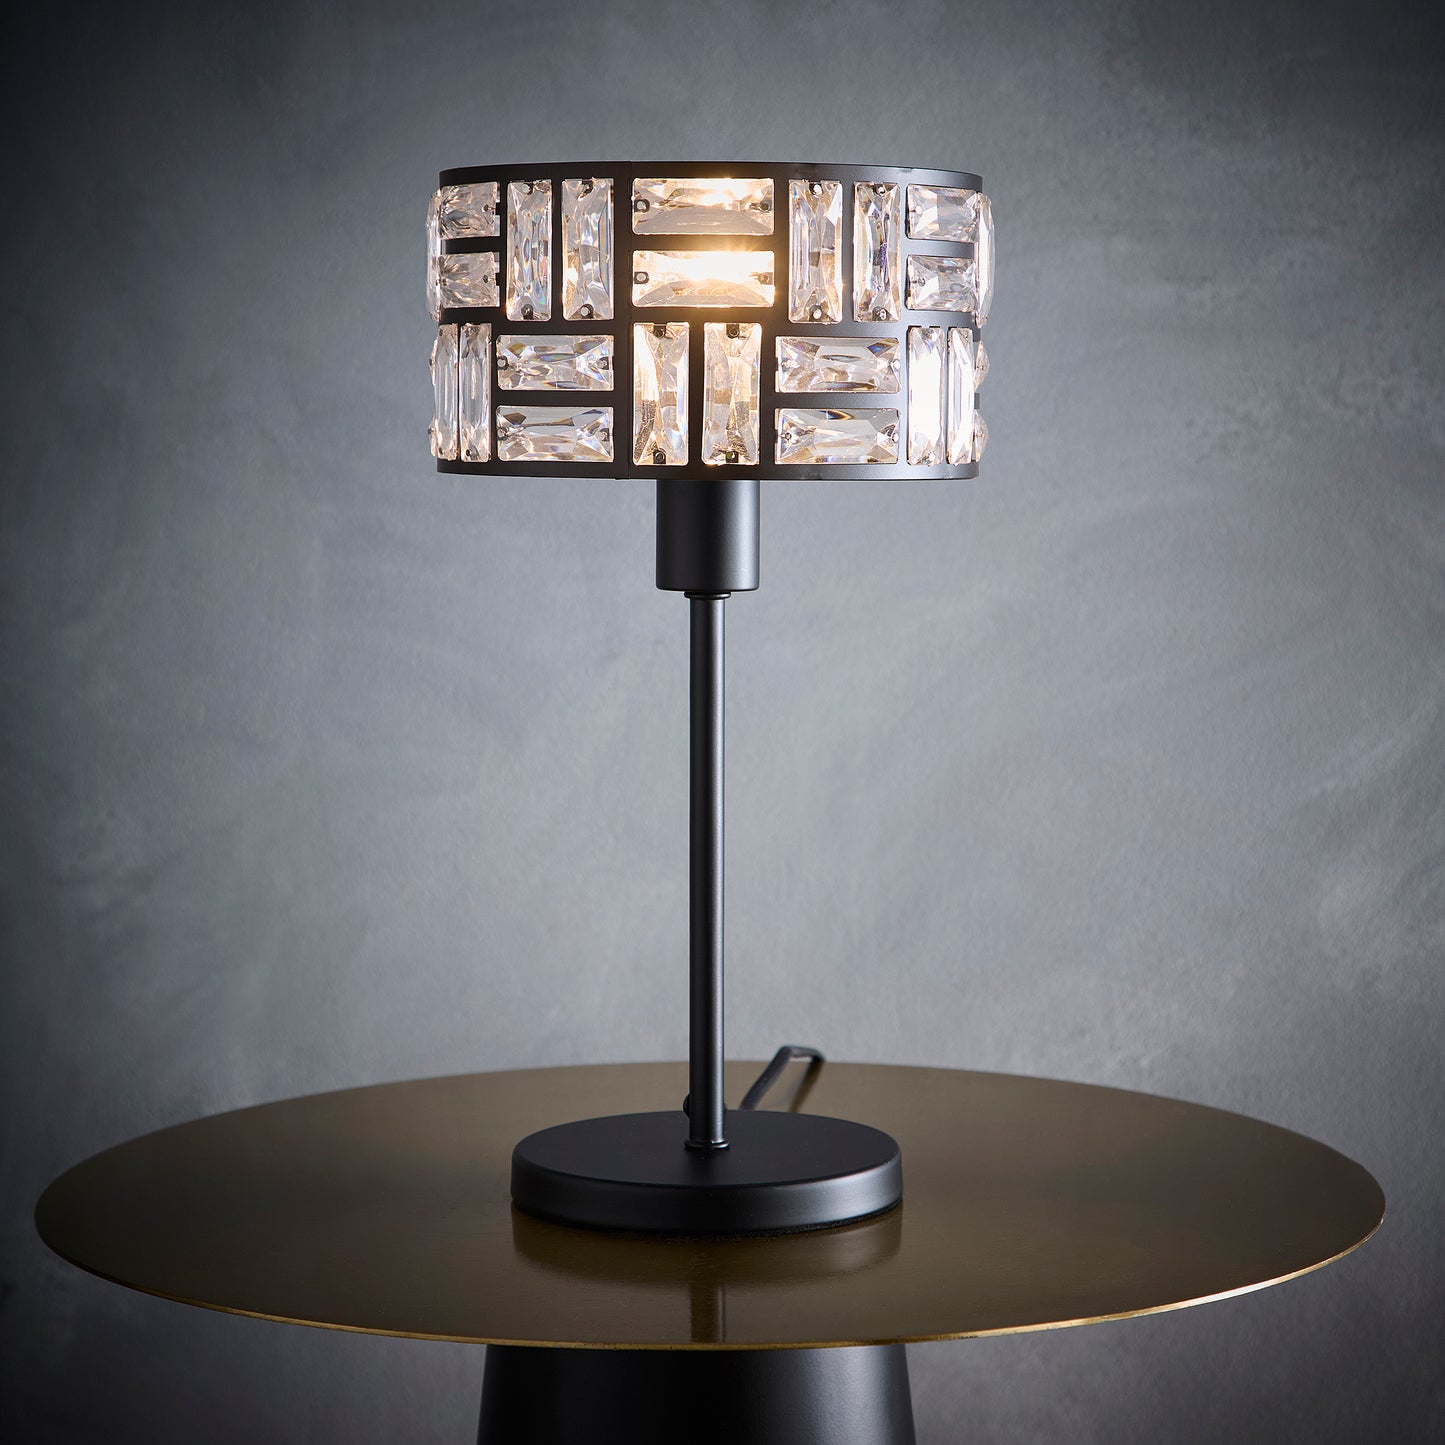 Black Table Lamp With Acrylic Glass Drum Shade in a Metal Cut Out Design